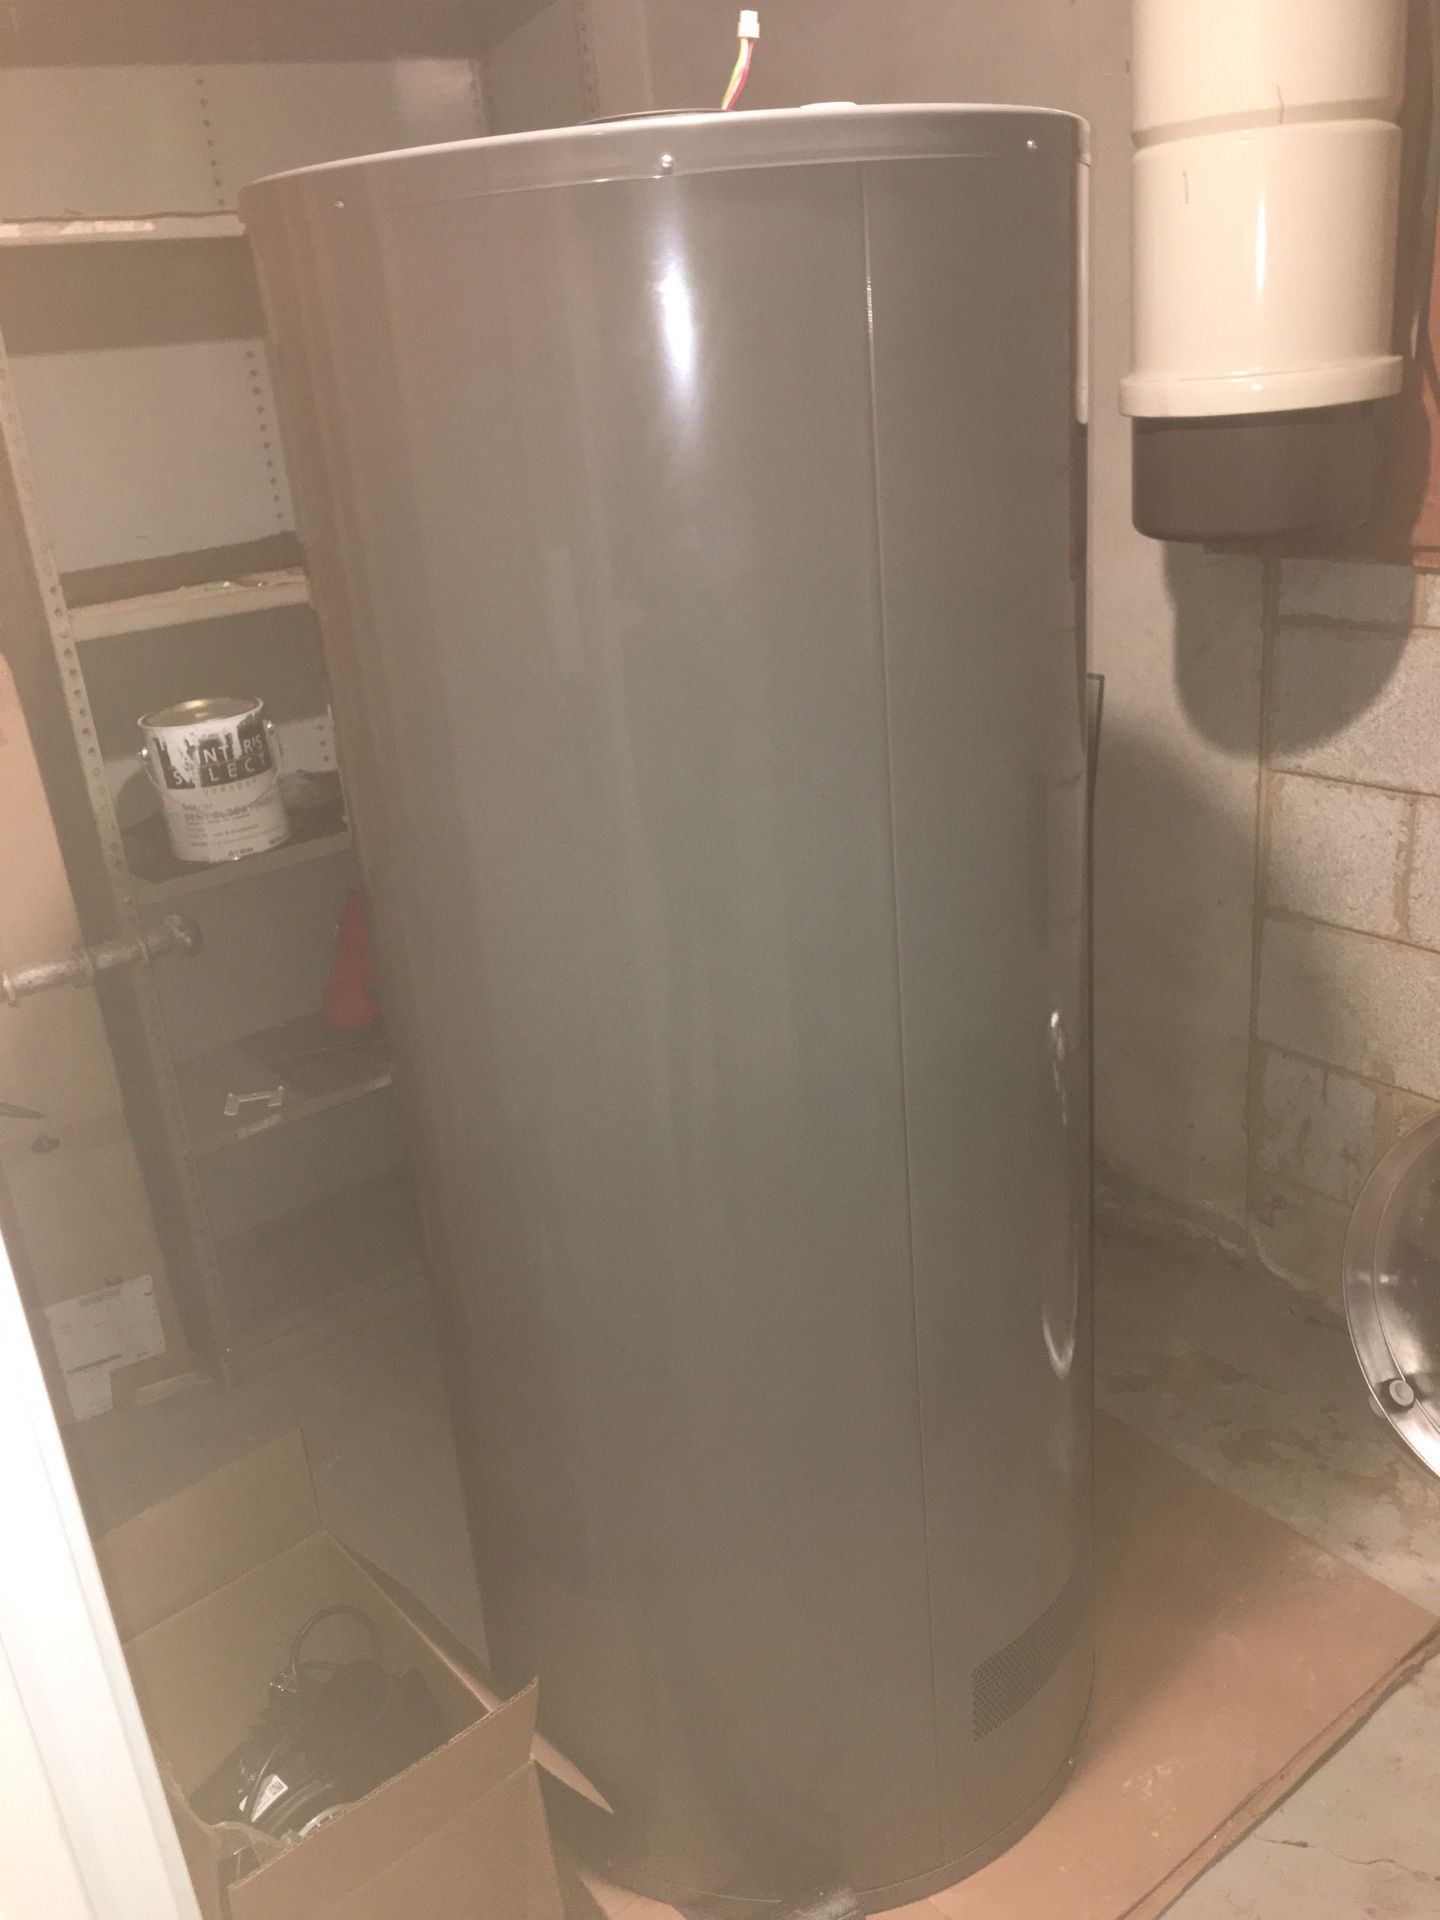 75 gallon gas hot water heater with electric fan ventilation system